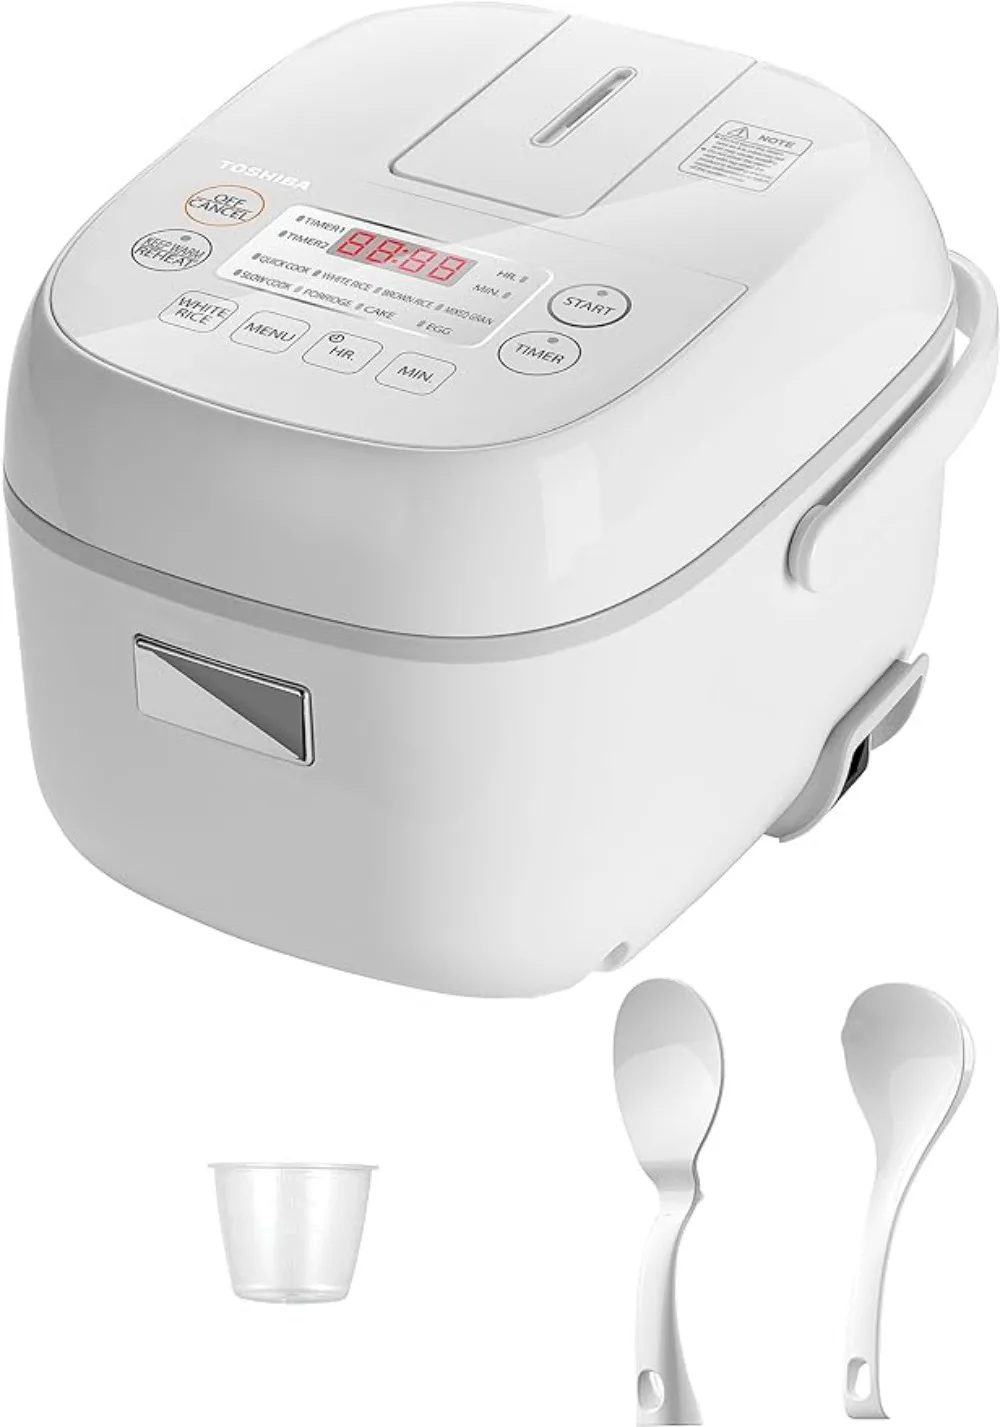 

Toshiba Rice Cooker Small 3 Cup Uncooked – LCD Display with 8 Cooking Functions, Fuzzy Logic Technology, 24-Hr Delay Timer